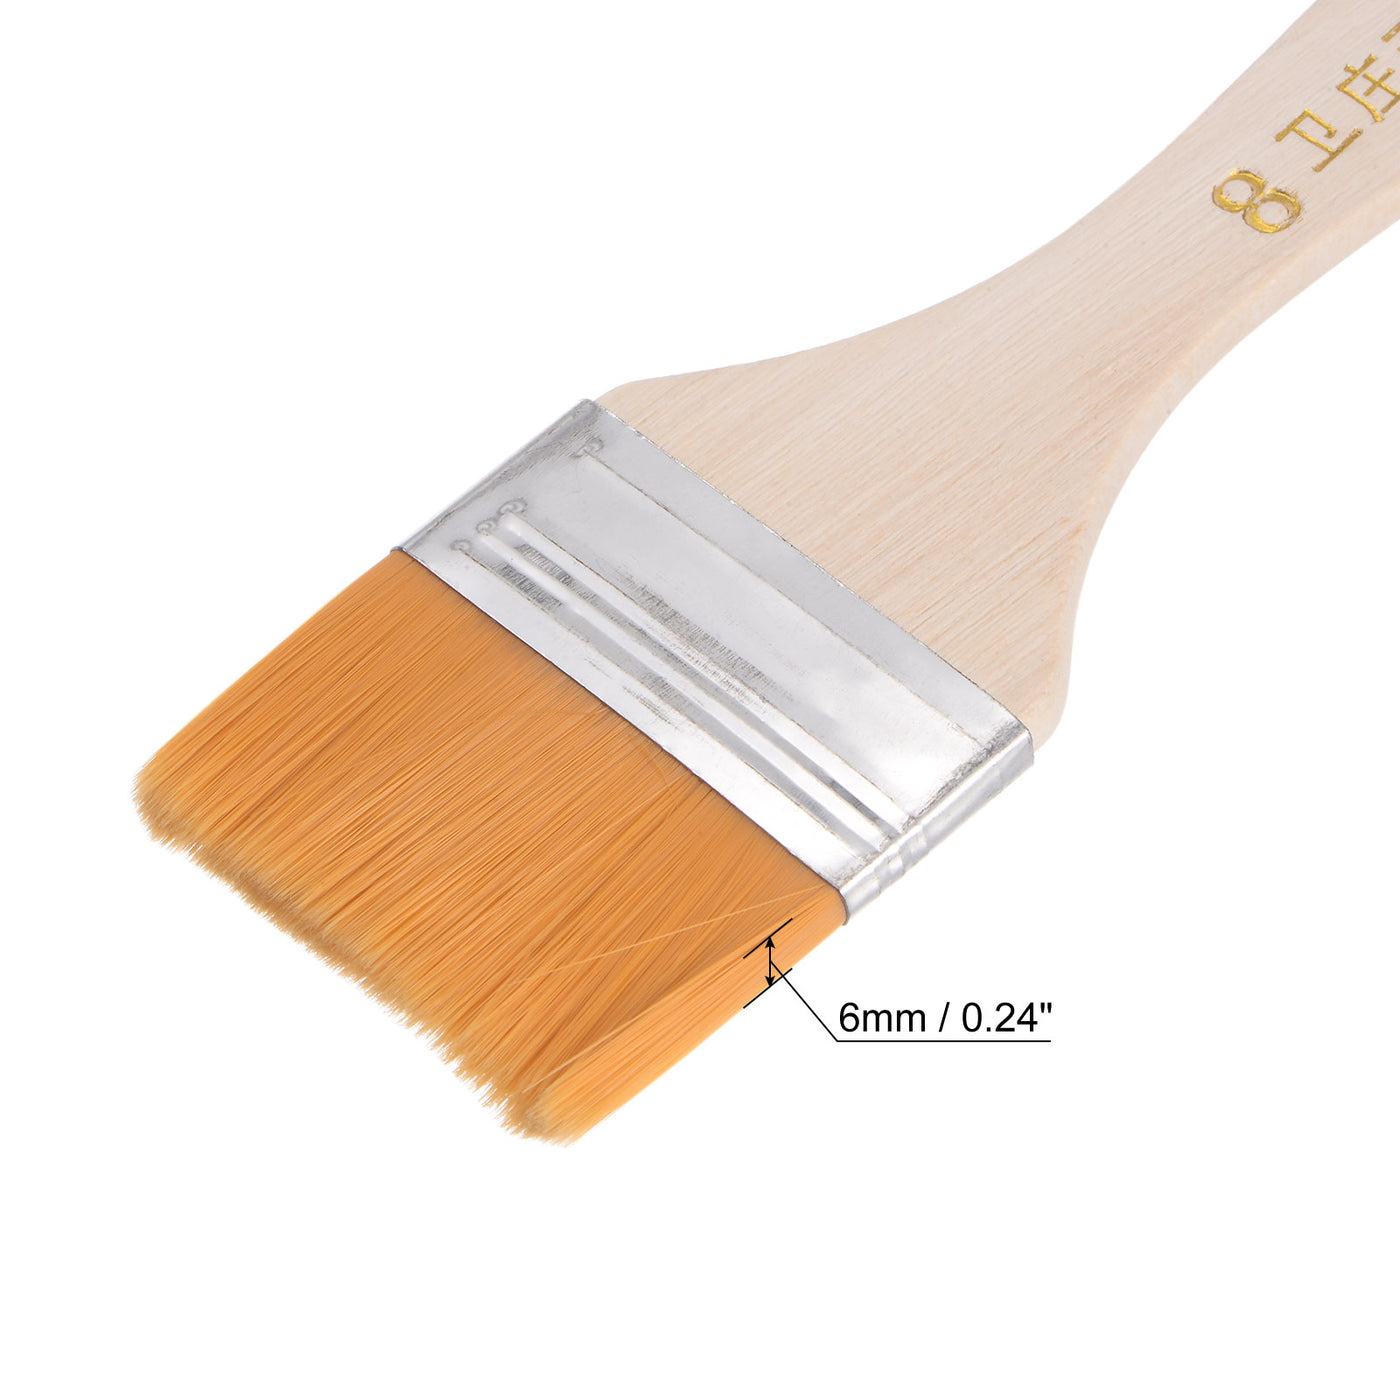 uxcell Uxcell 1.9" Width Small Paint Brush Nylon Bristle with Wood Handle Painting Tool 3Pcs